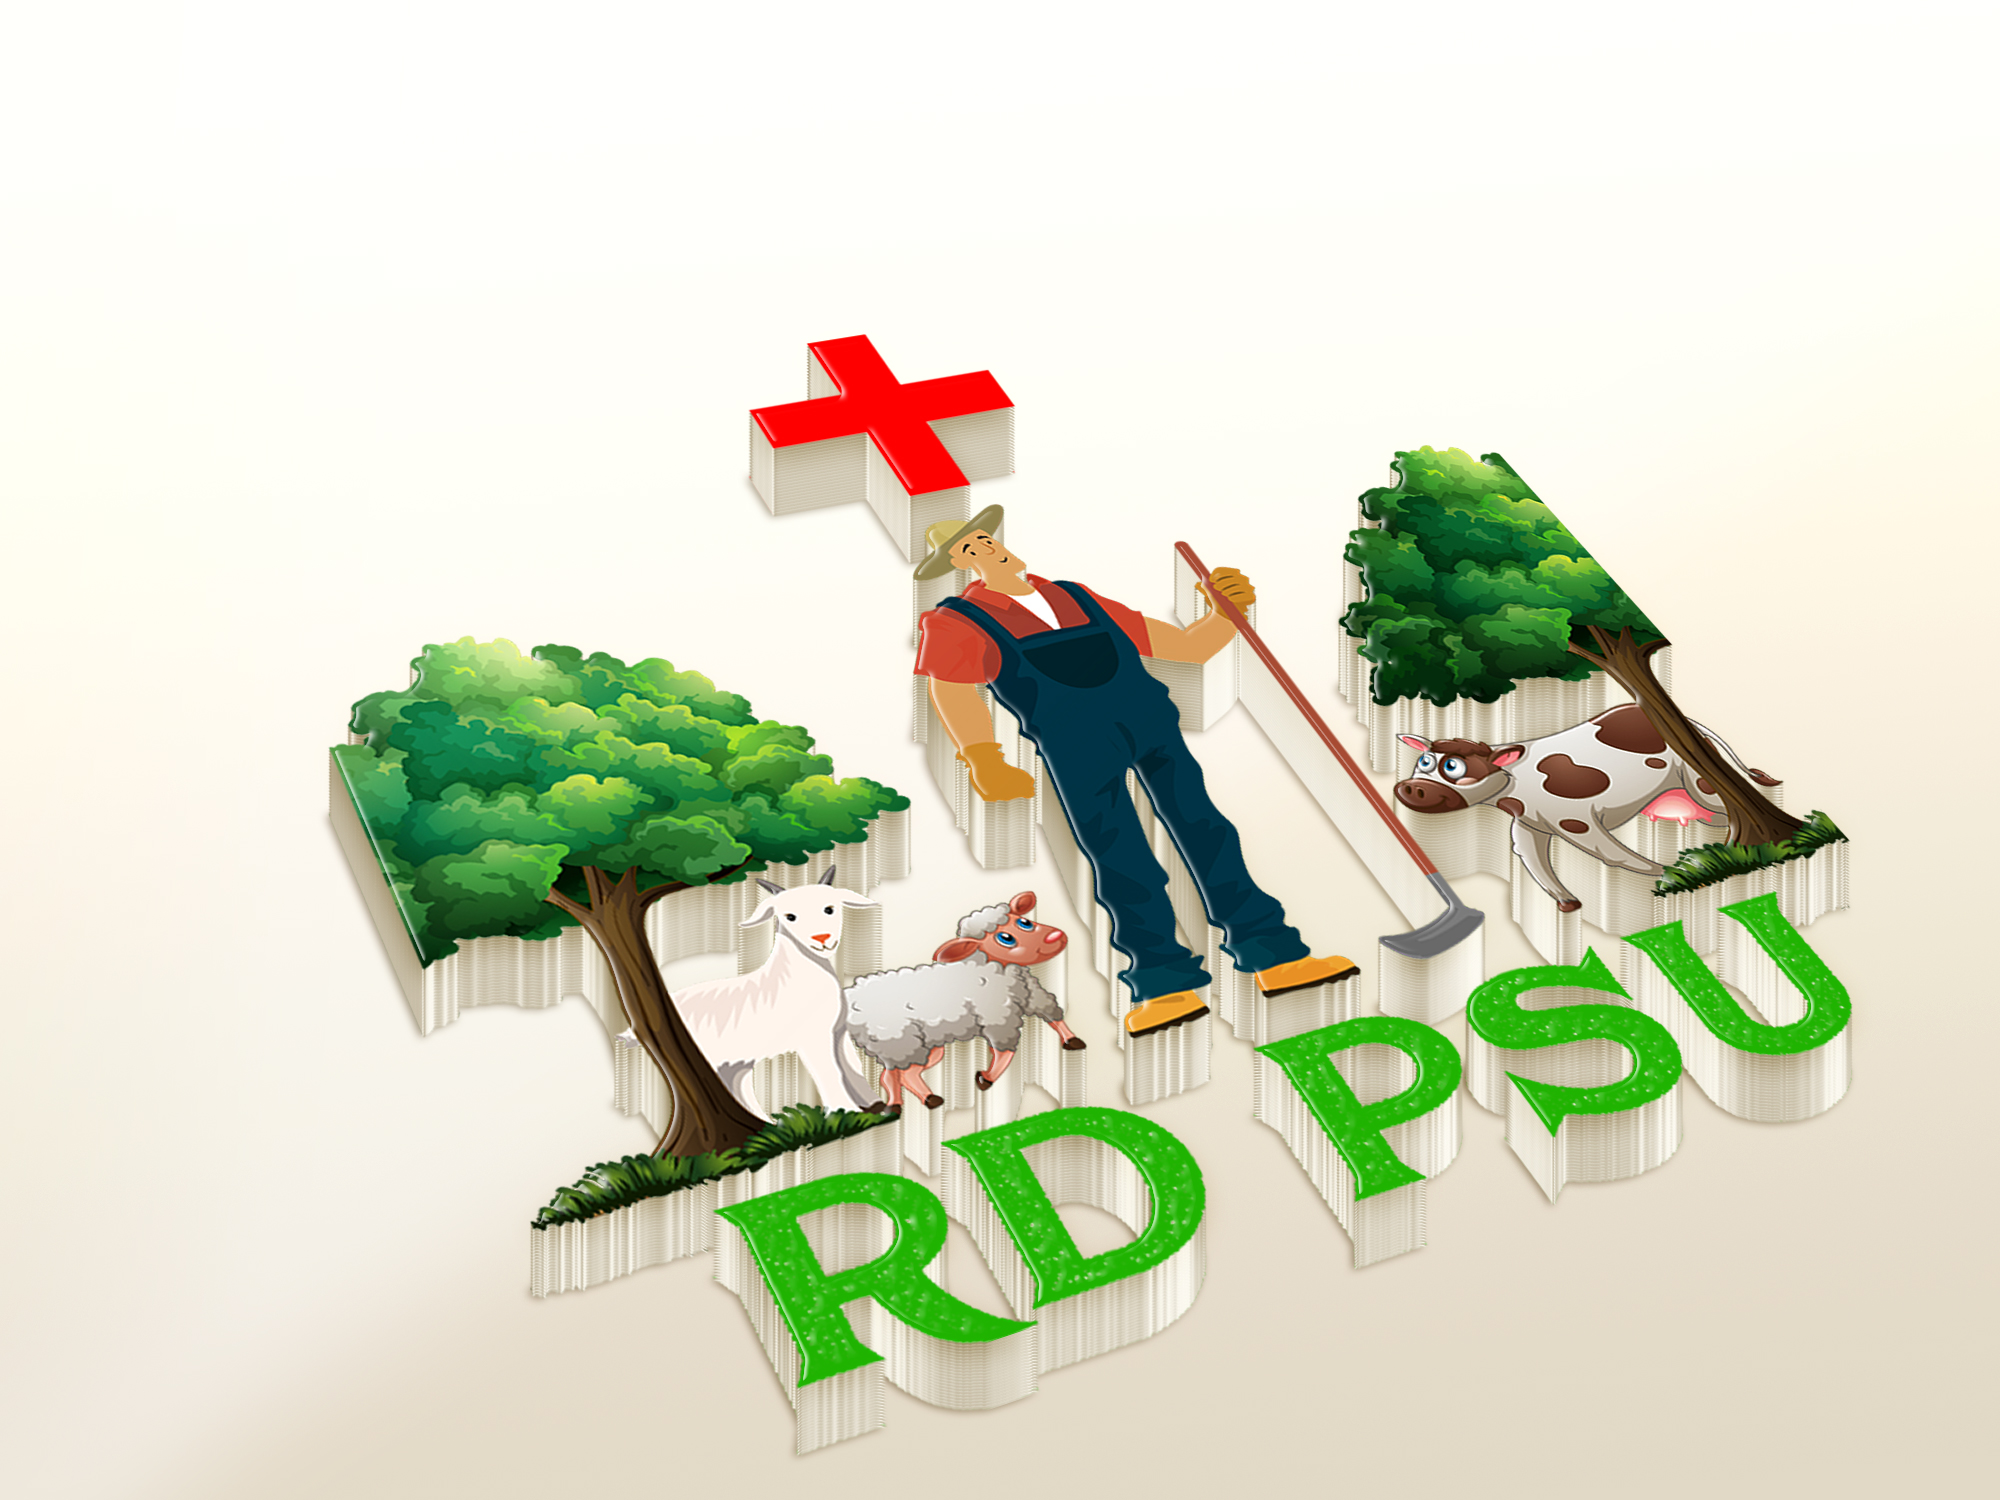 RD-PSU - Logo Designing - xpertllab technologies private limited